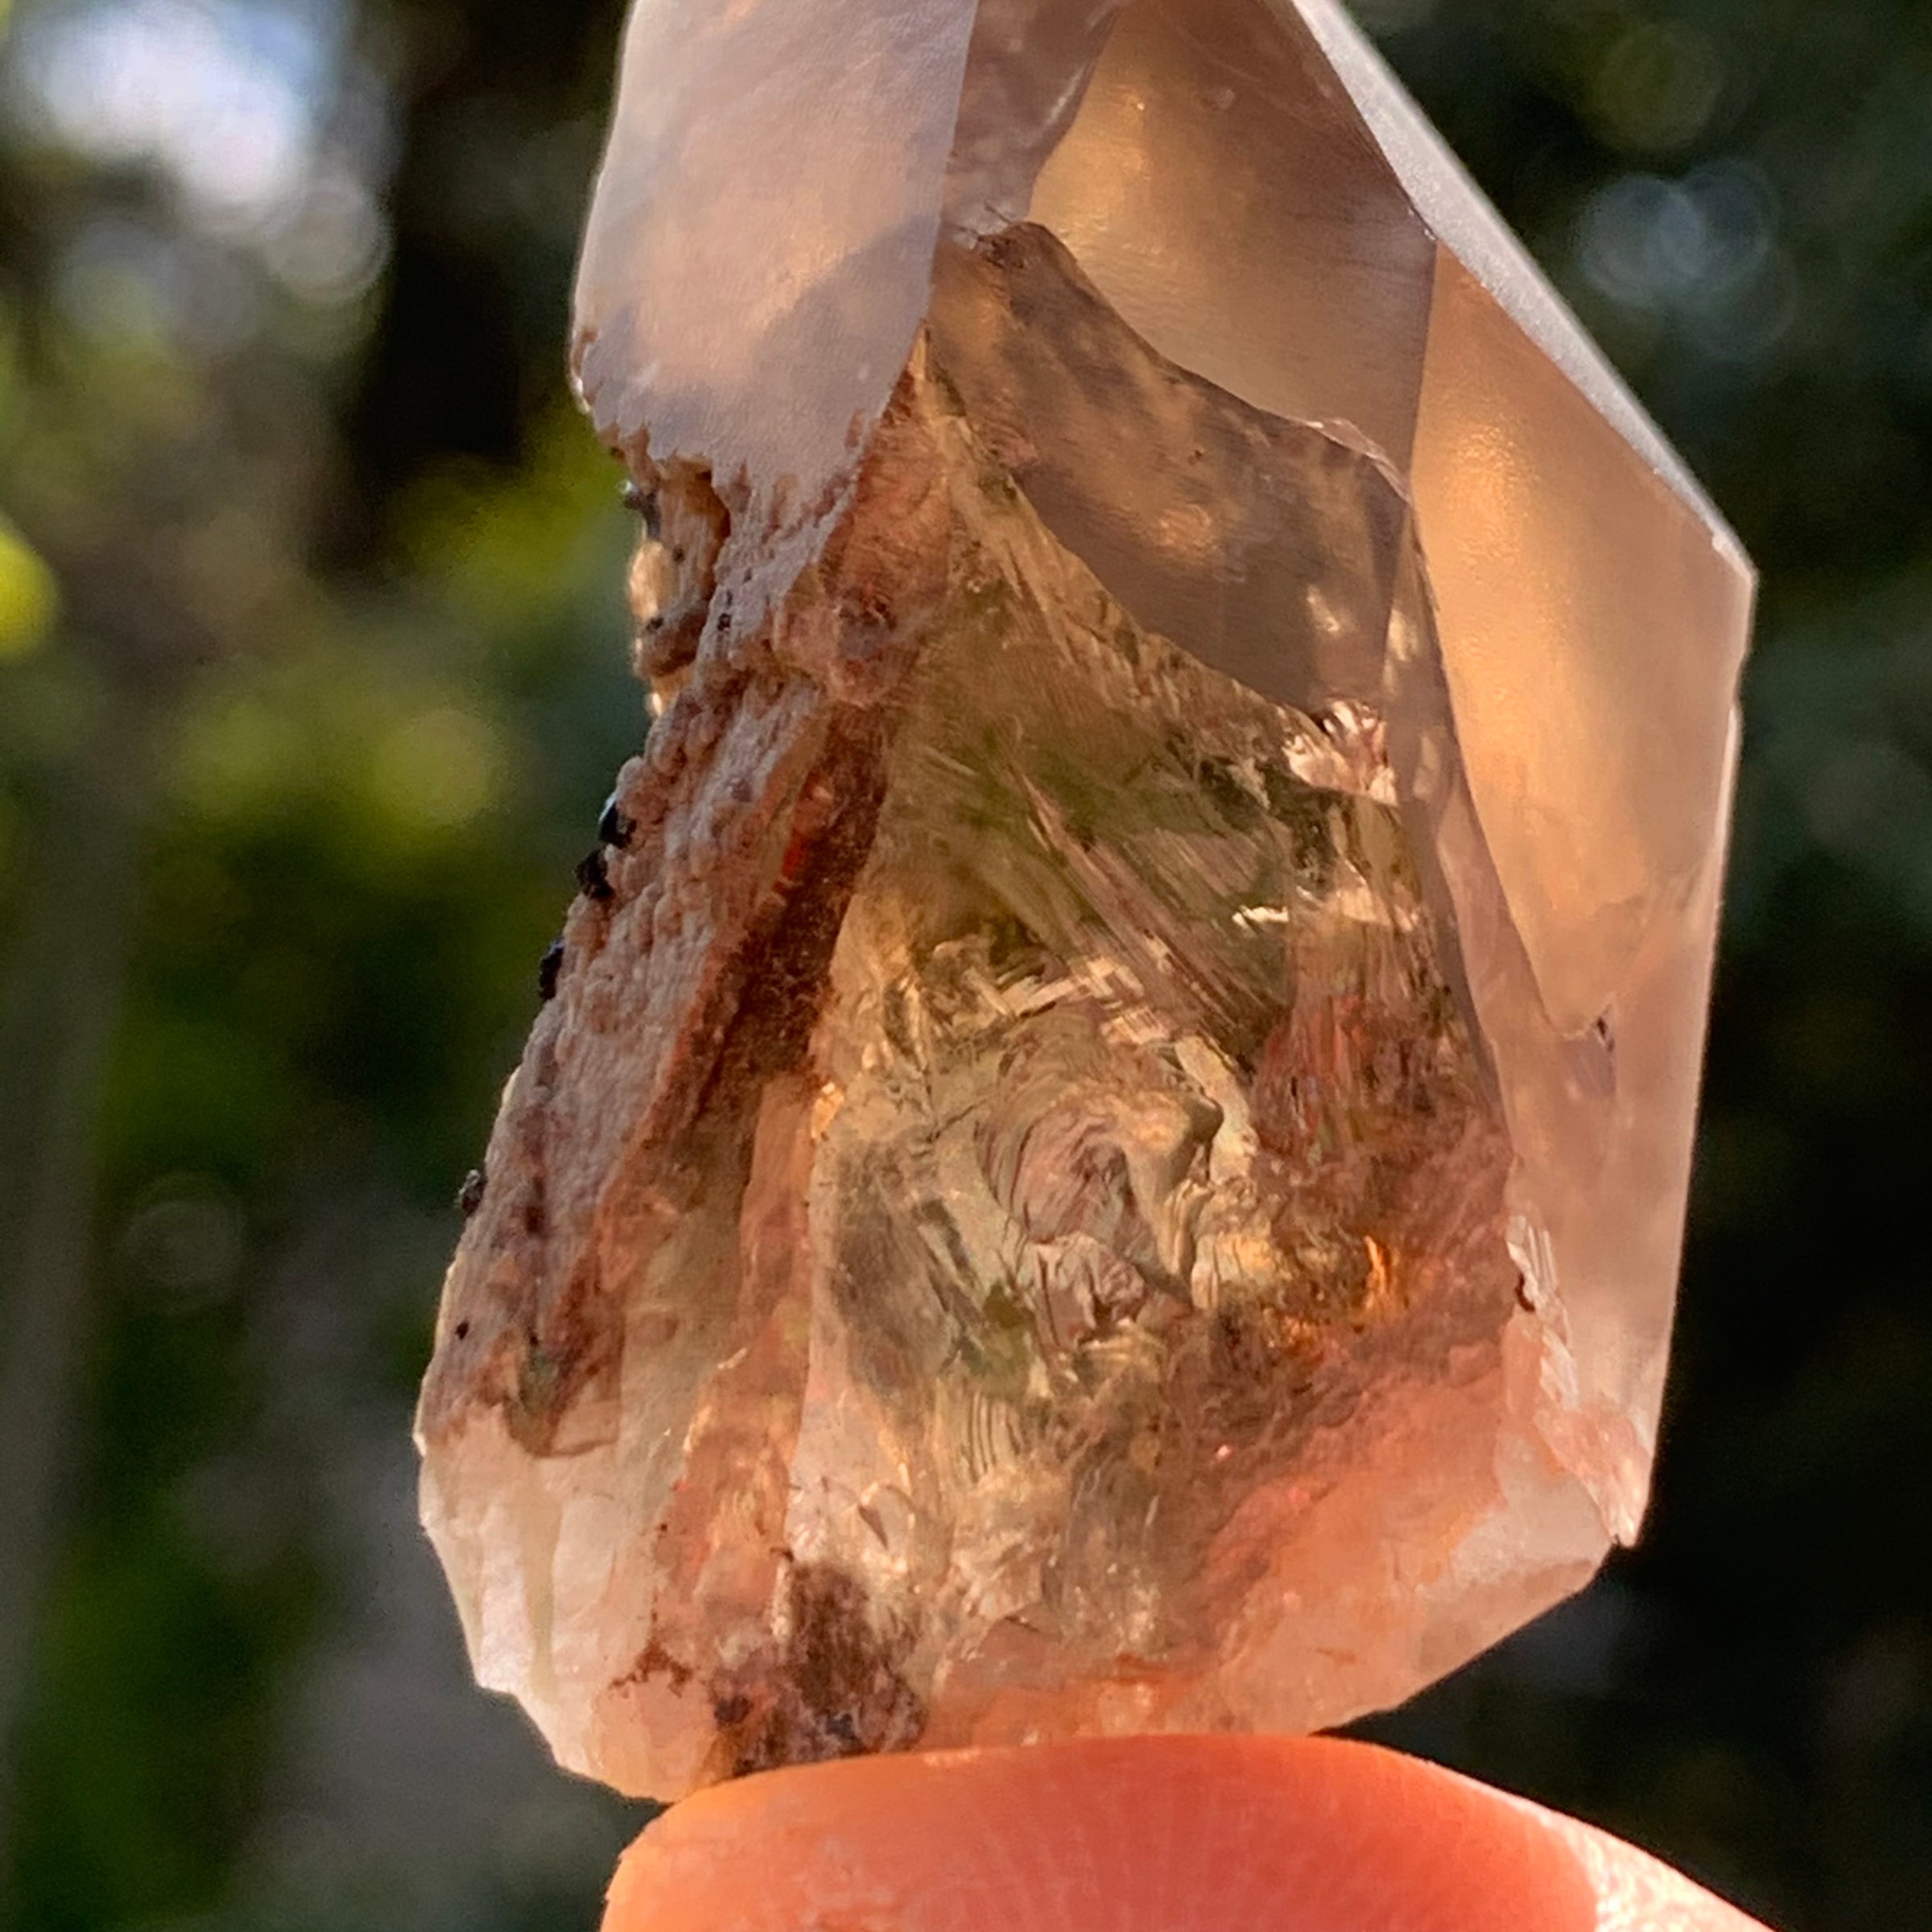 tiny brookite crystals on a smokey quartz point held up in hand with sunlight shining through